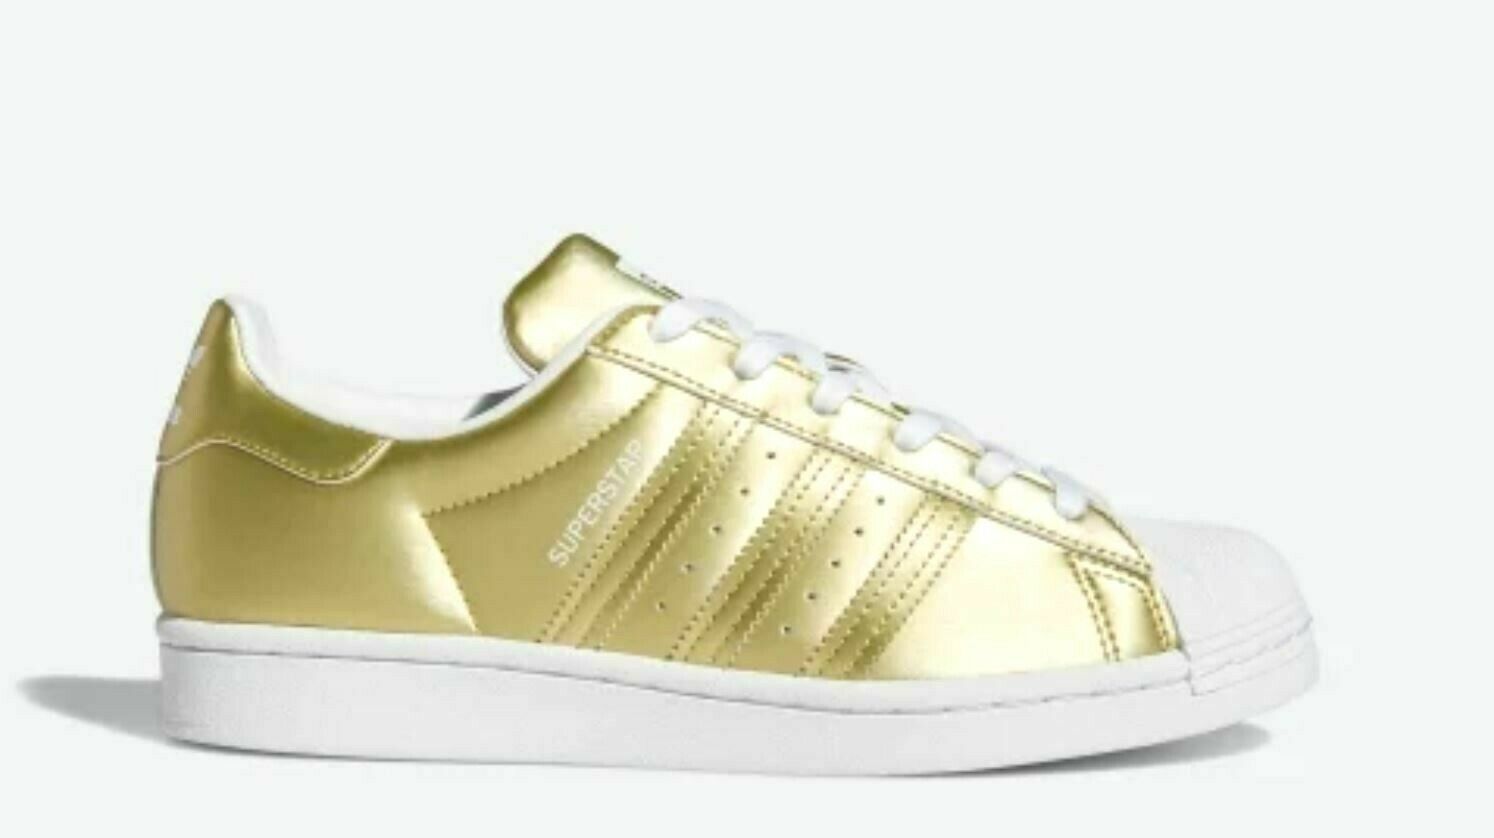 NEW WOMEN'S ADIDAS ORIGINALS SUPERSTAR SHELL TOE SHOES ~SIZE US 8 FY1154 GOLD